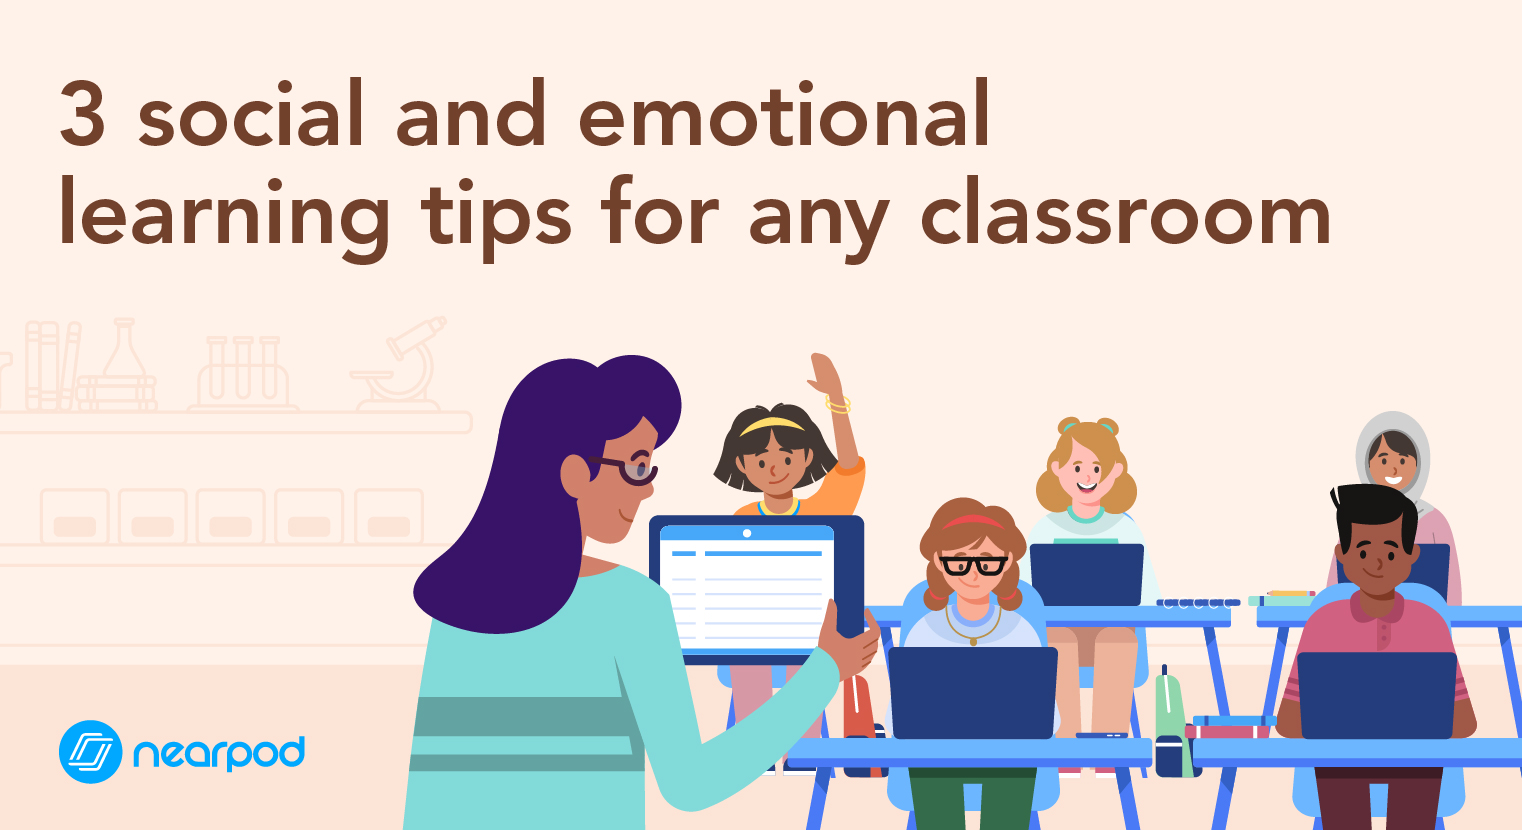 Social and emotional learning tips with Nearpod